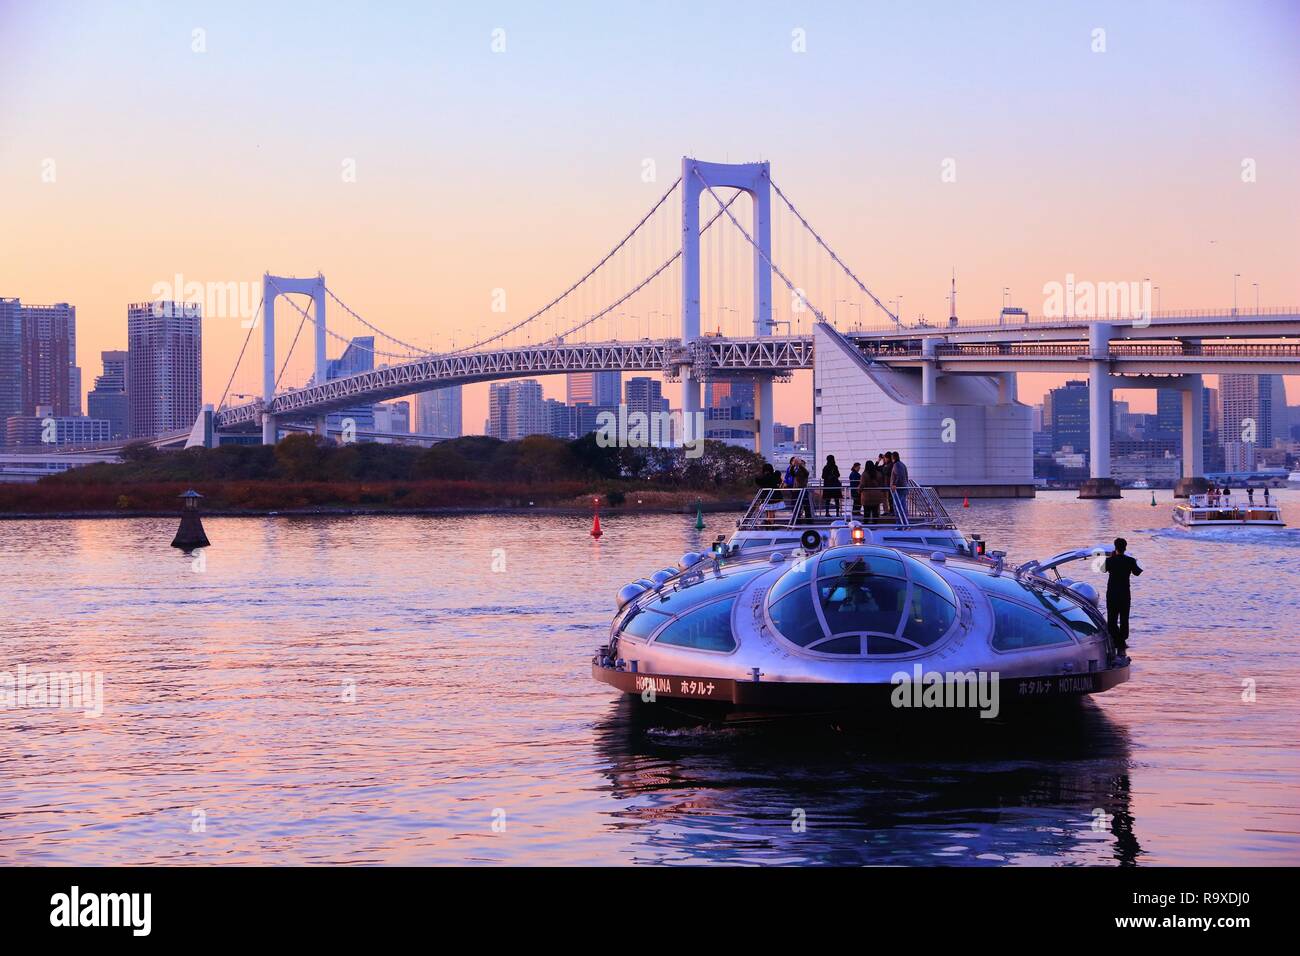 TOKYO, JAPAN - DECEMBER 2, 2016: People ride Hotaluna tour cruise boat in Tokyo, Japan. Tokyo is the capital city of Japan. 37.8 million people live i Stock Photo